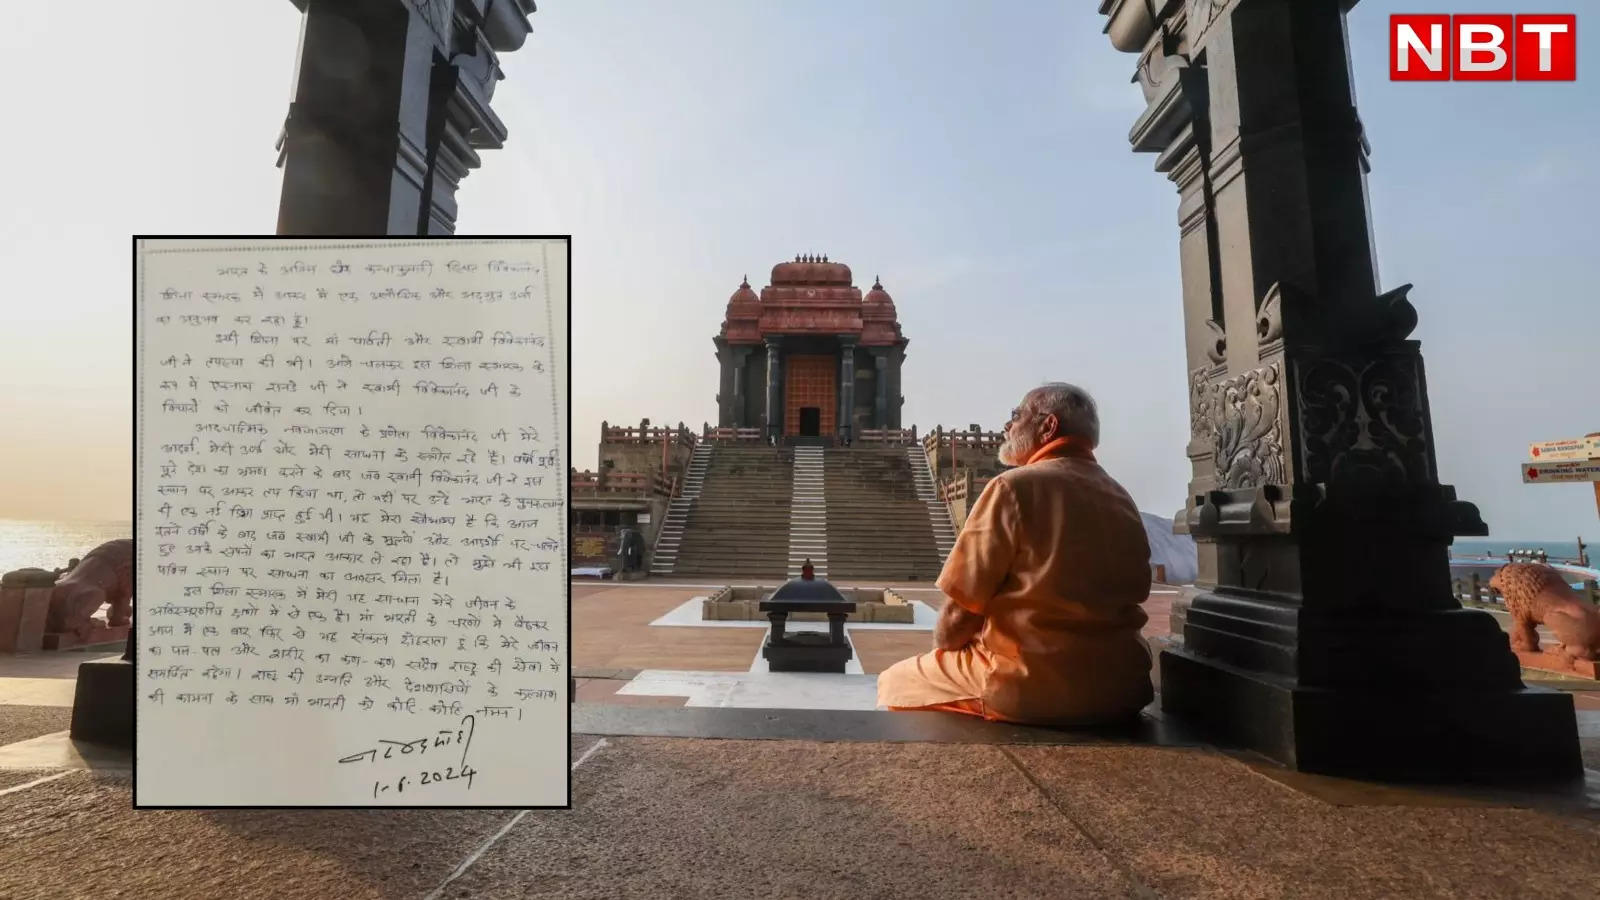 After meditating for 45 hours in Kanyakumari, PM leaves for Delhi, see his handwritten message?